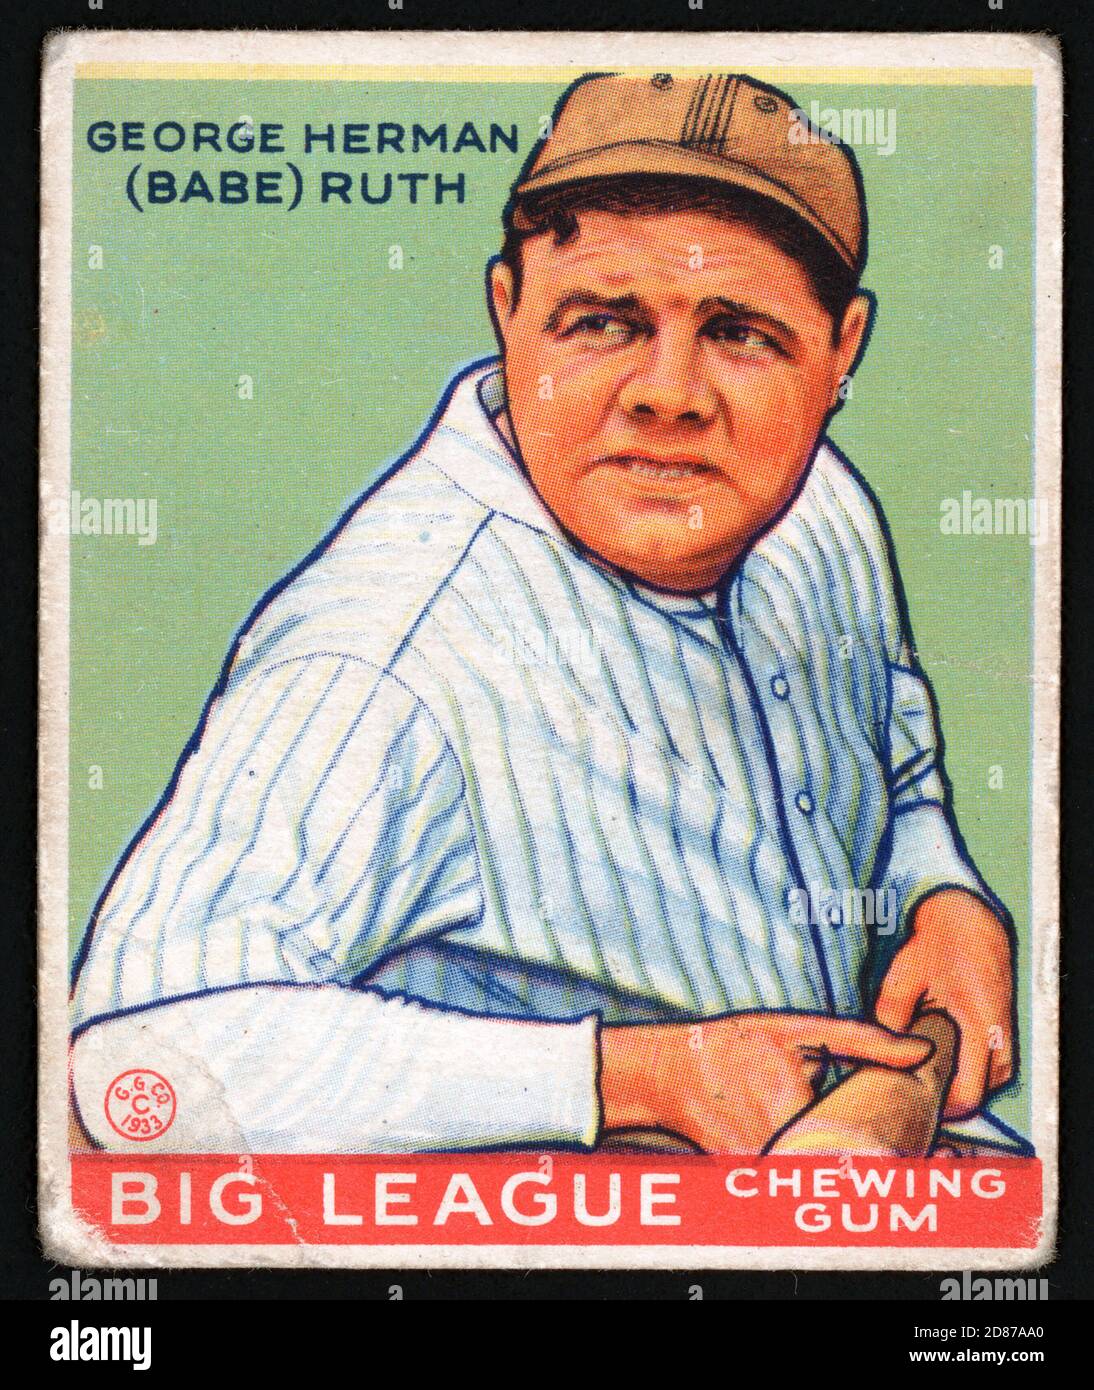 George Herman, Babe Ruth, Big League Chewing Gum card. This is one of a series of 240 Baseball Stars. 1933. Stock Photo